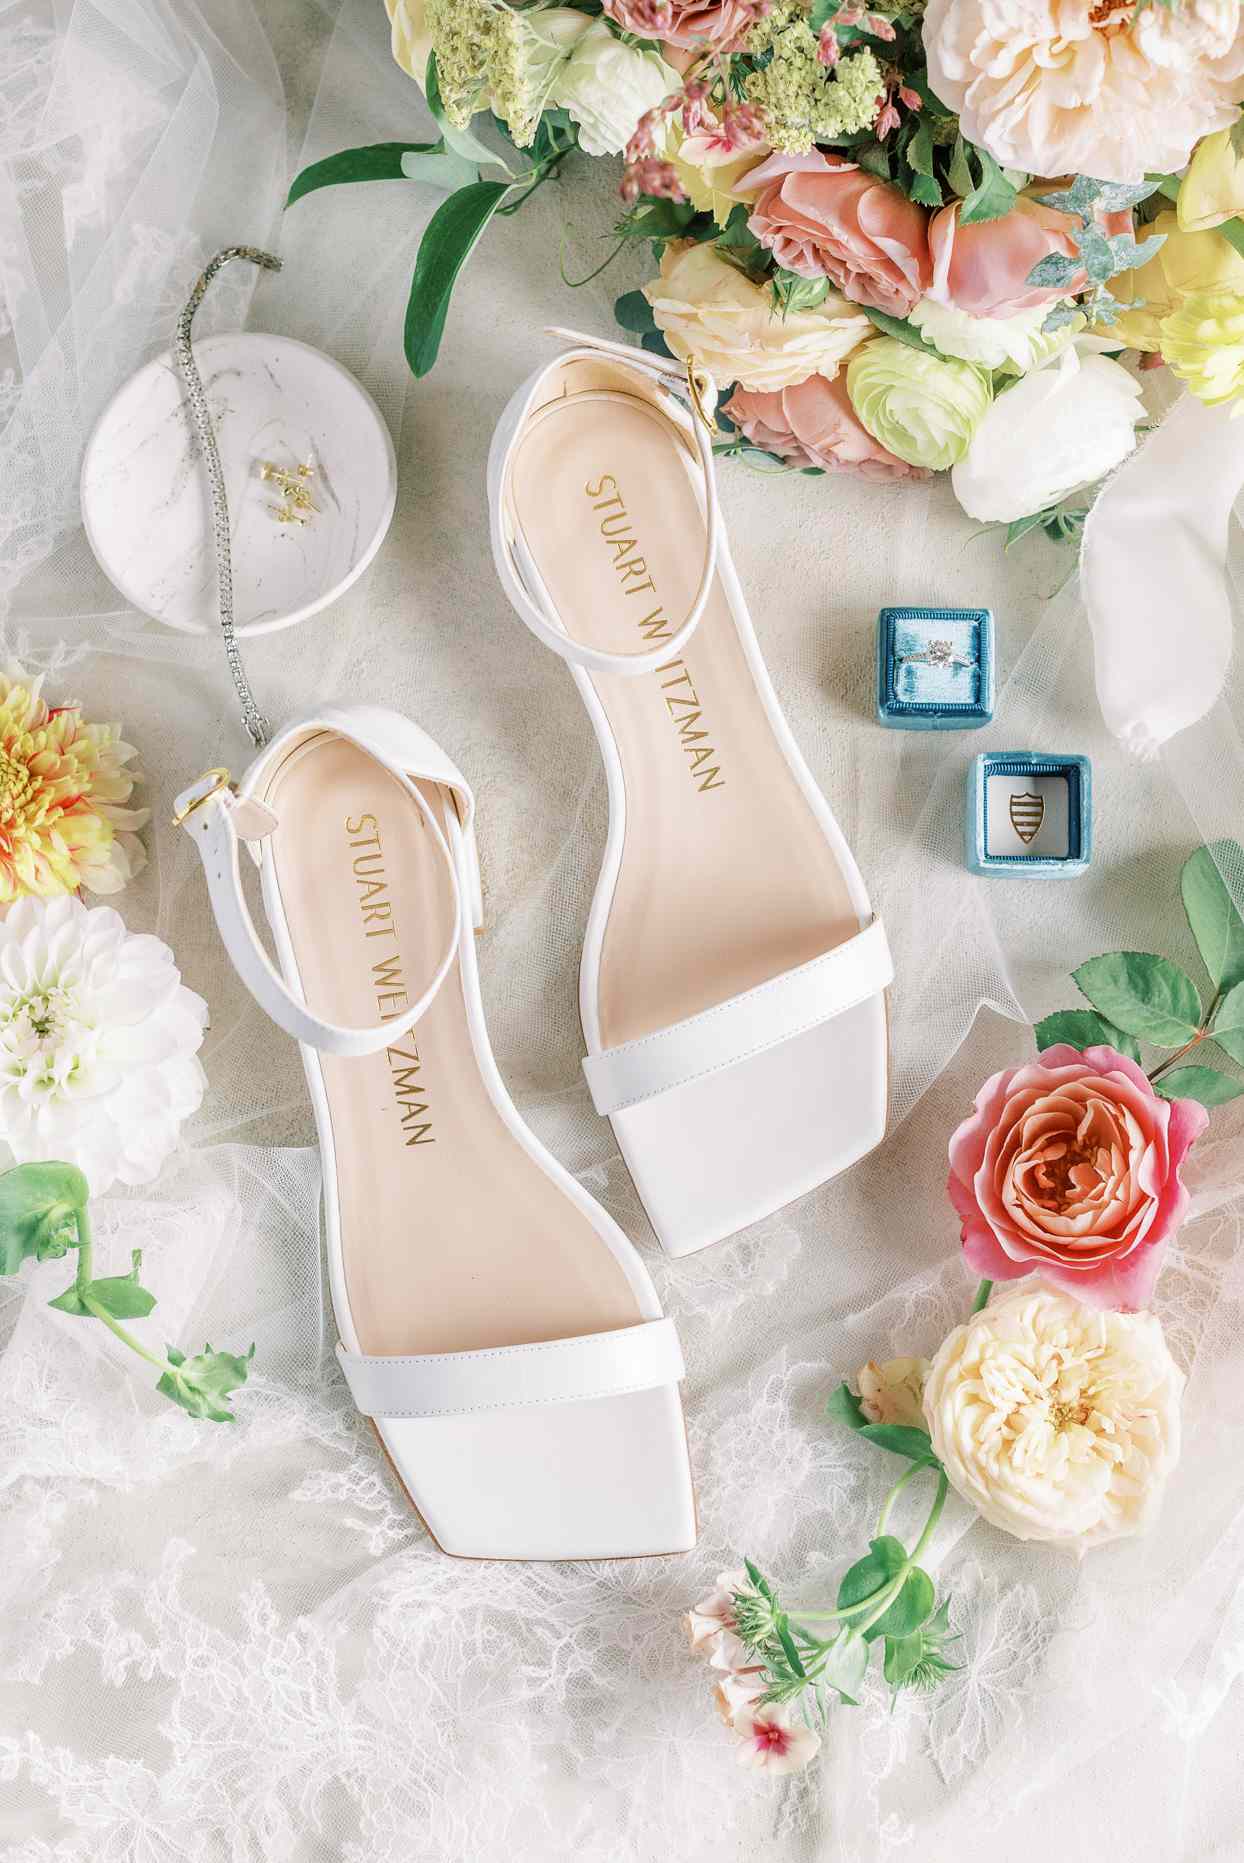 bride's white wedding shoes, flowers, and ring